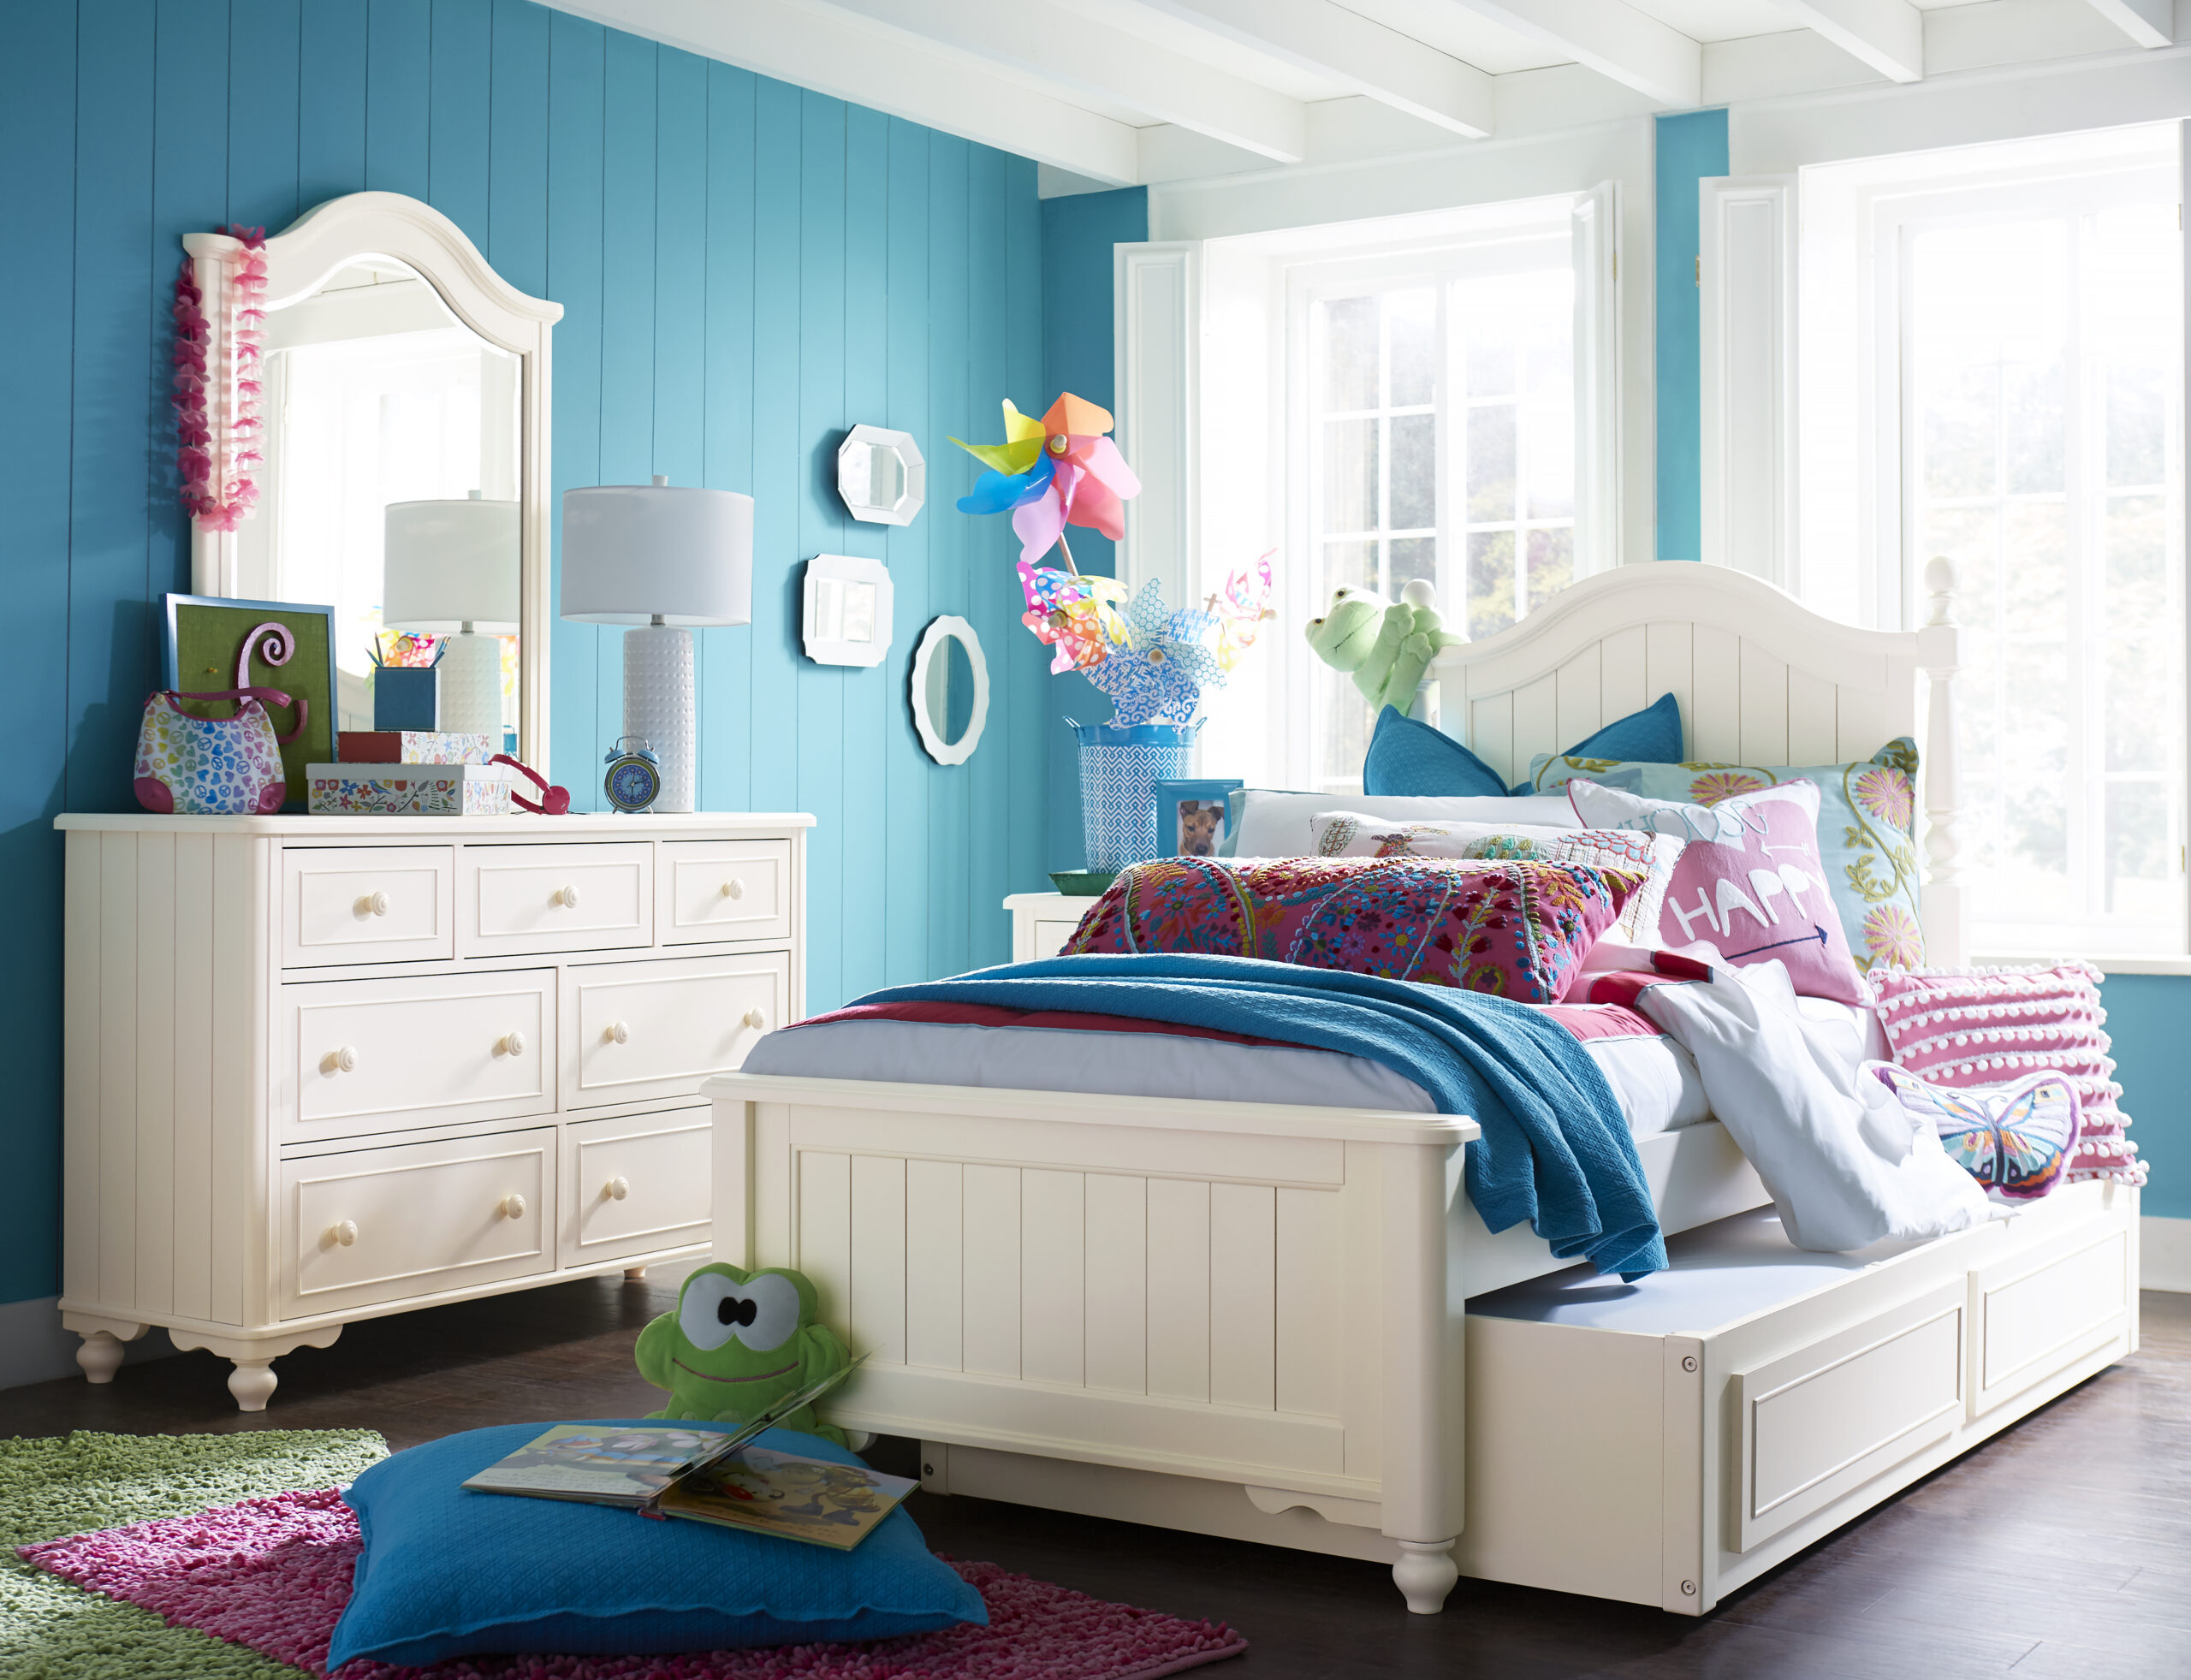 somerset bedroom furniture collection